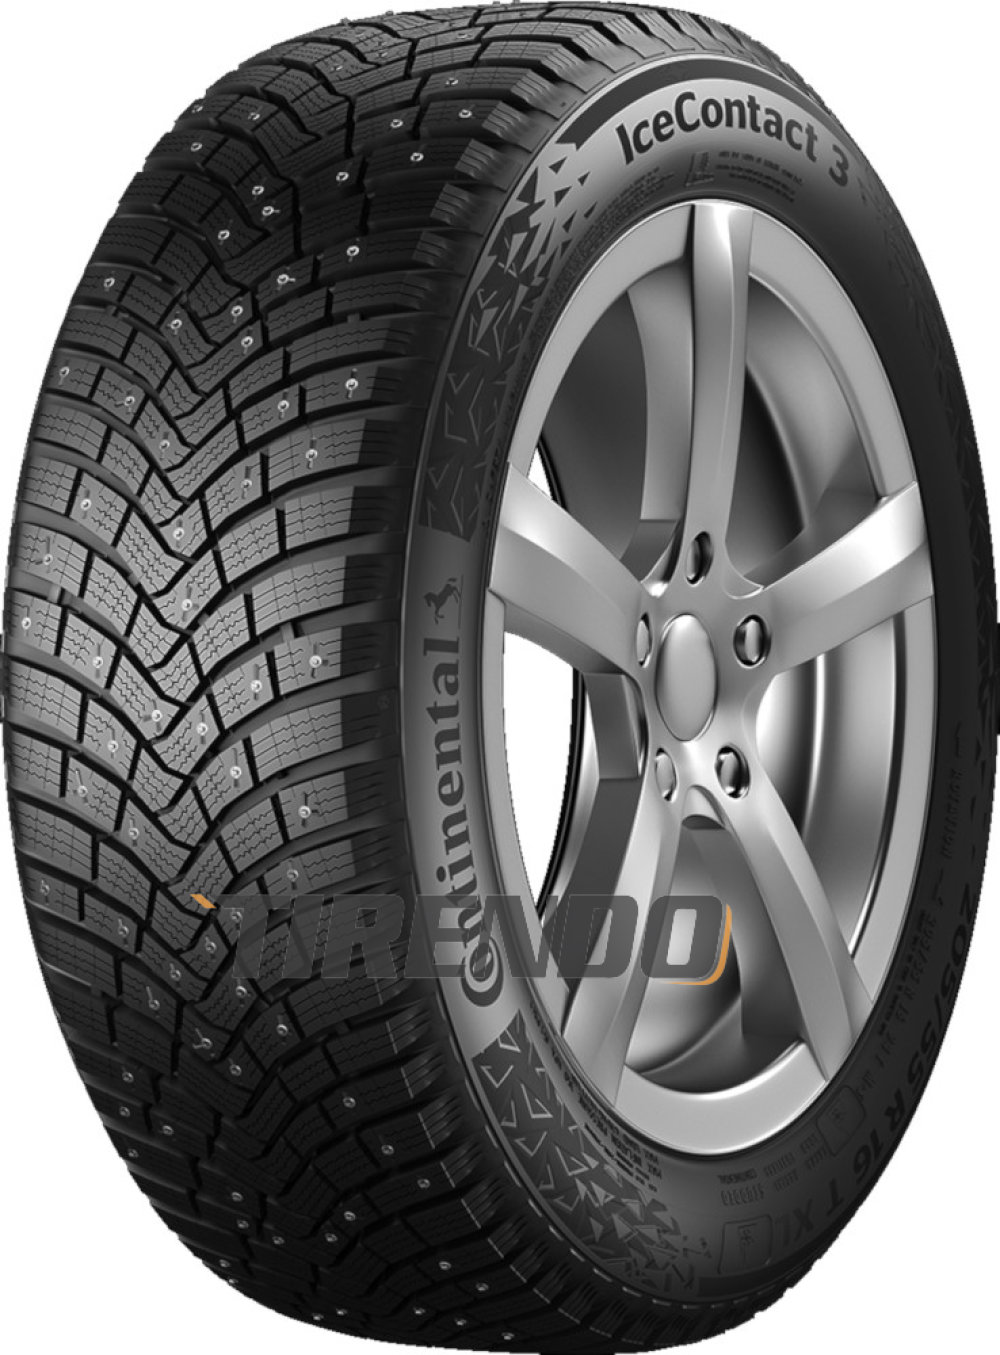 Continental IceContact 3 ( 235/55 R18 104T XL, bespiked ) von Continental